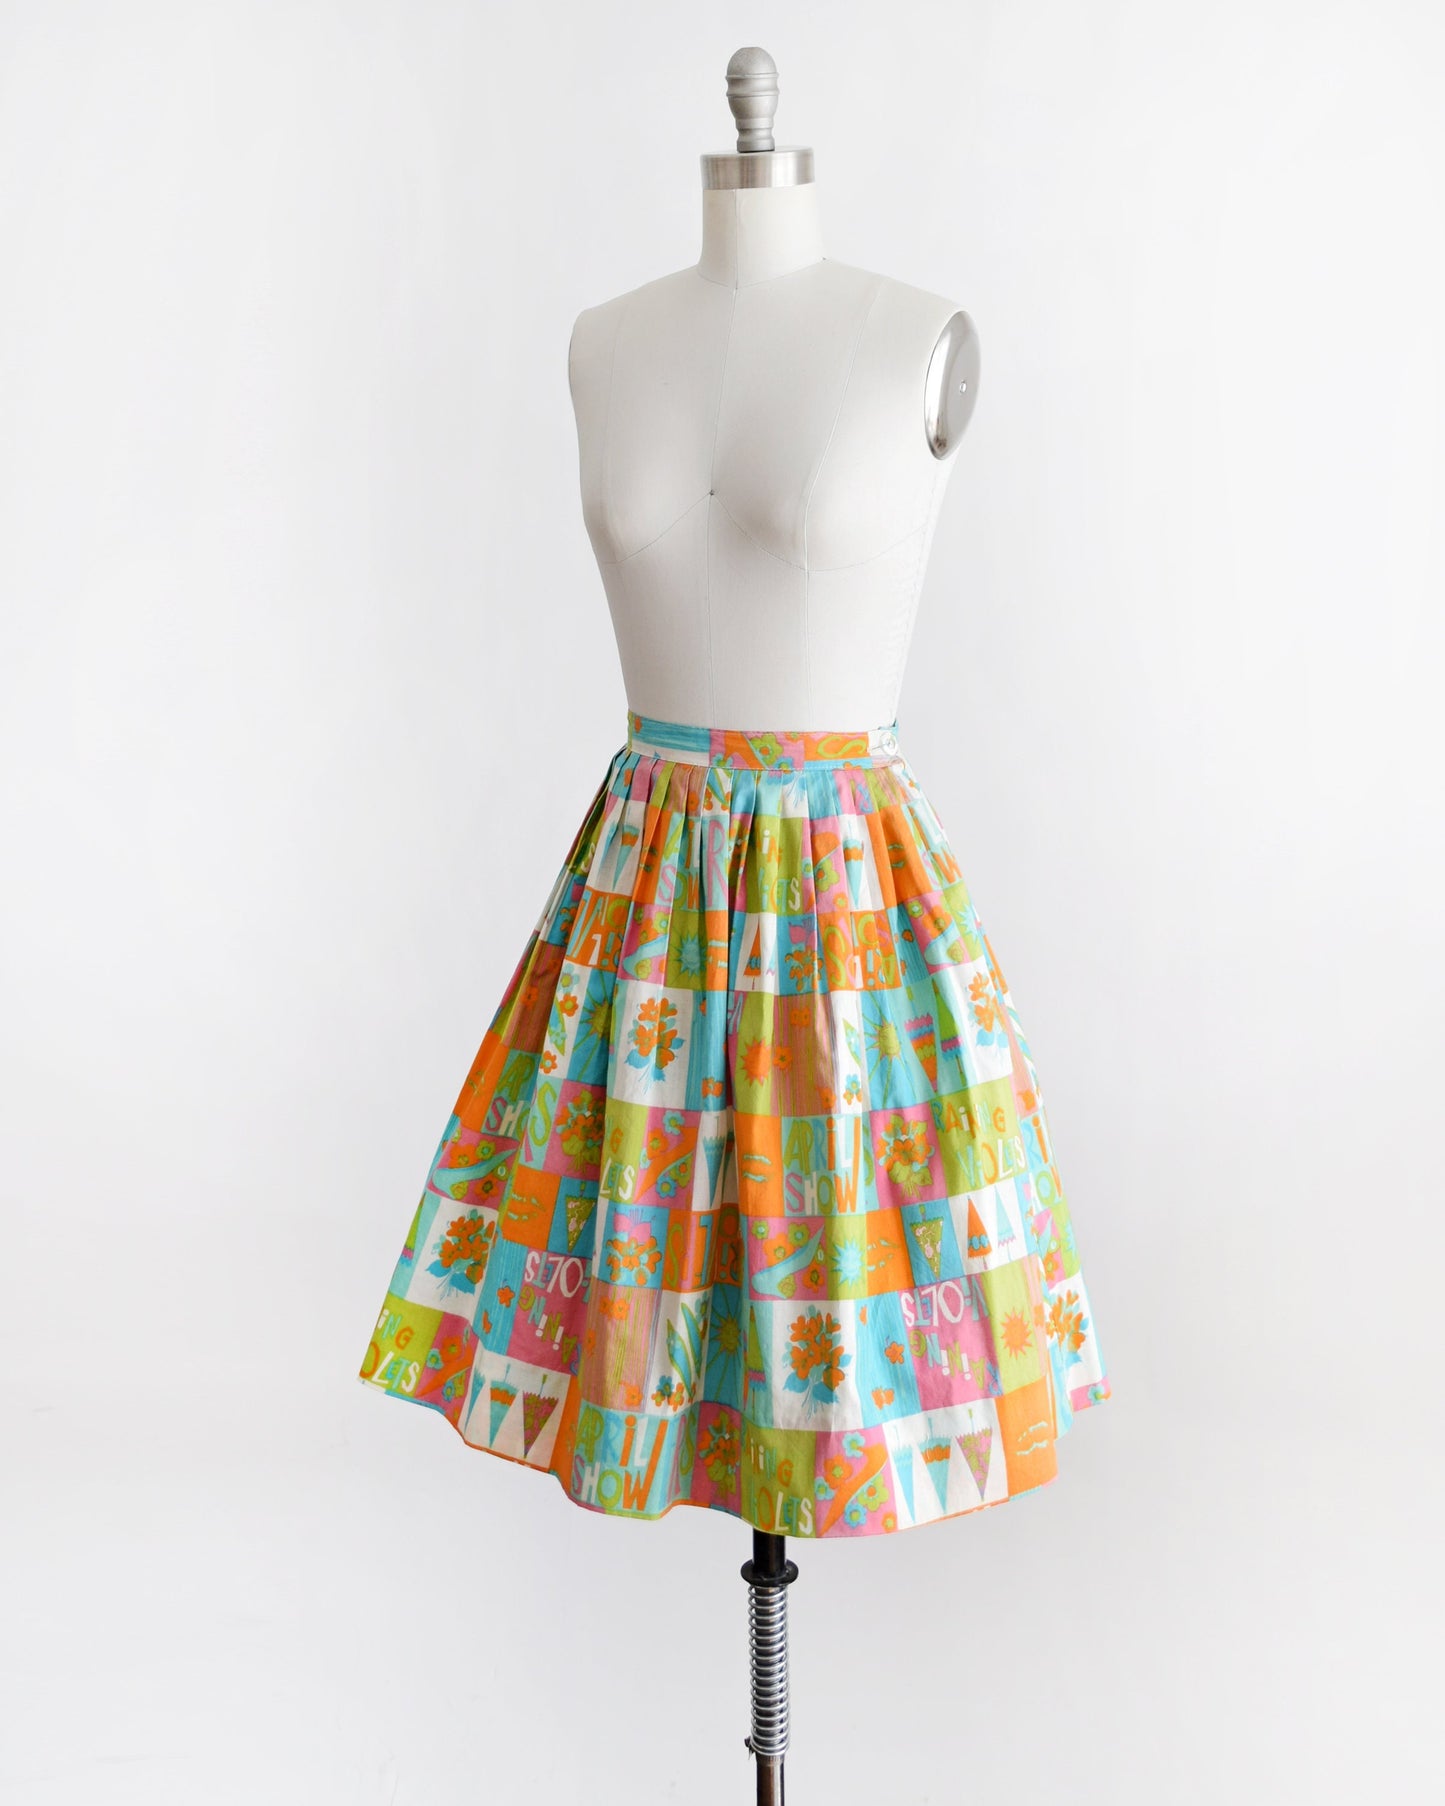 Side front view of a vintage 50s skirt has an April showers theme with colorful blocks of flowers, umbrellas, shoes, the sun, and the words April Showers and Raining Violets in a classic mid century print. Skirt is modeled on a dress form